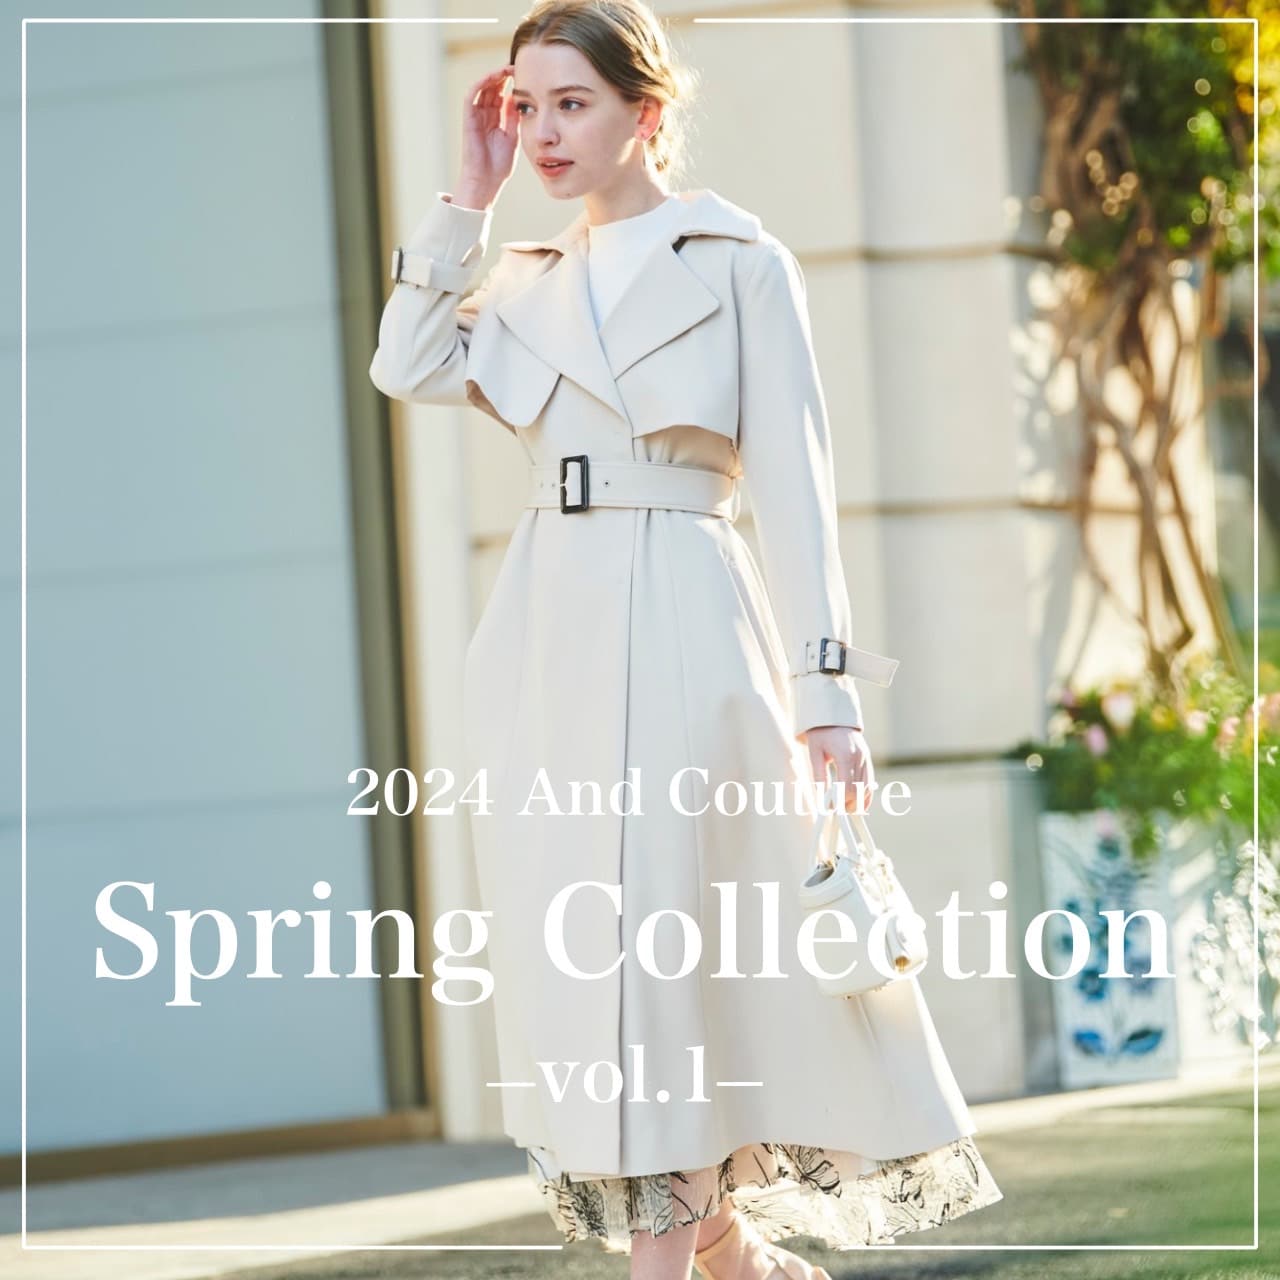 And Couture アンドクチュール 2024And Couture Spring Collection -Vol.1- 公開！